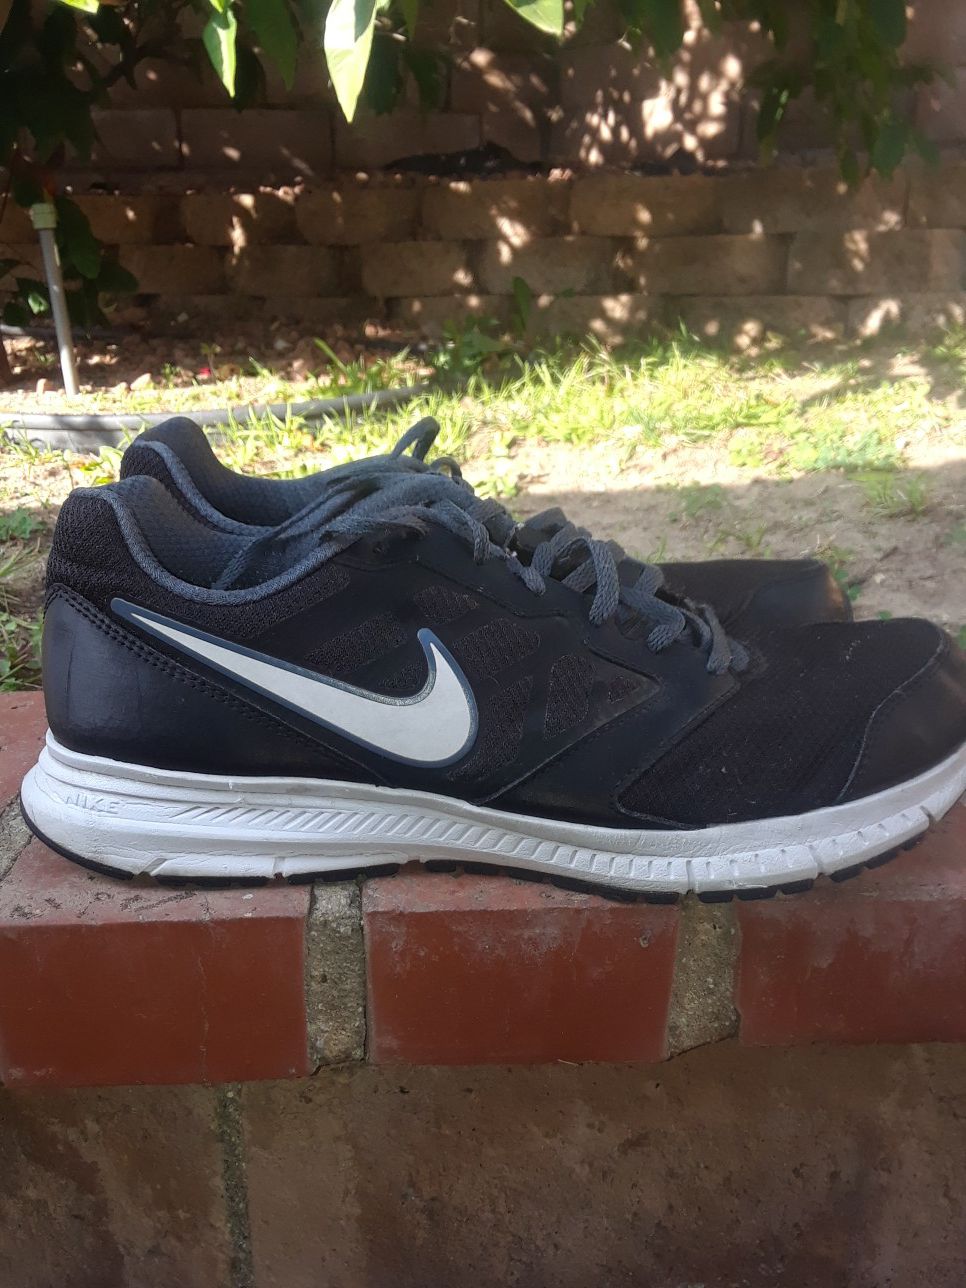 Size 11 nike mens shoes!